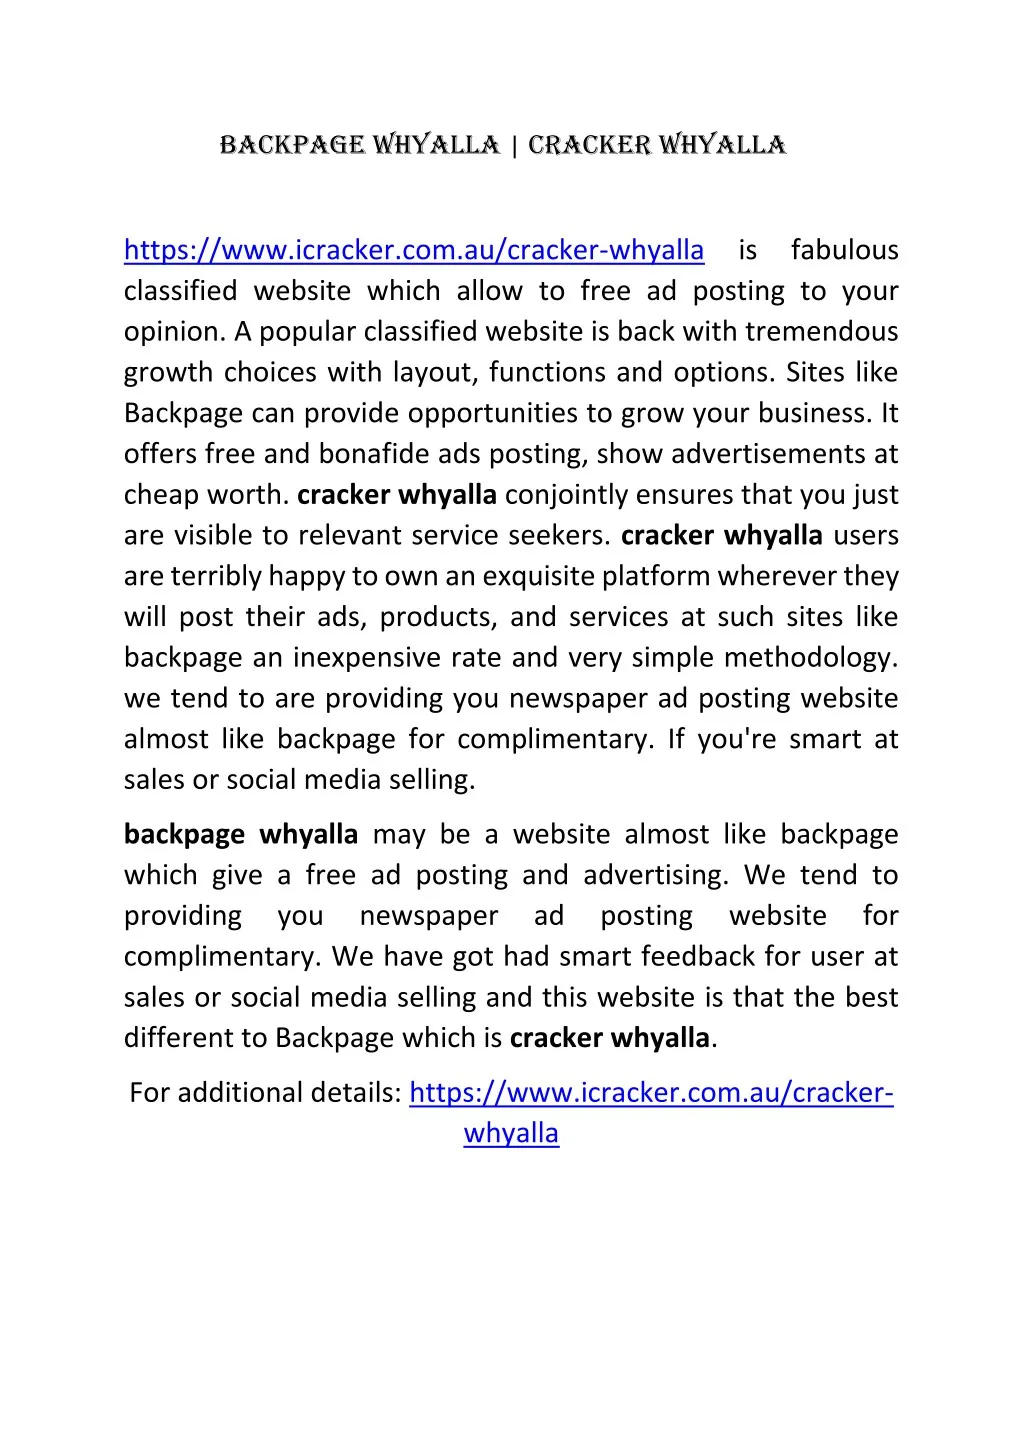 backpage whyalla cracker whyalla